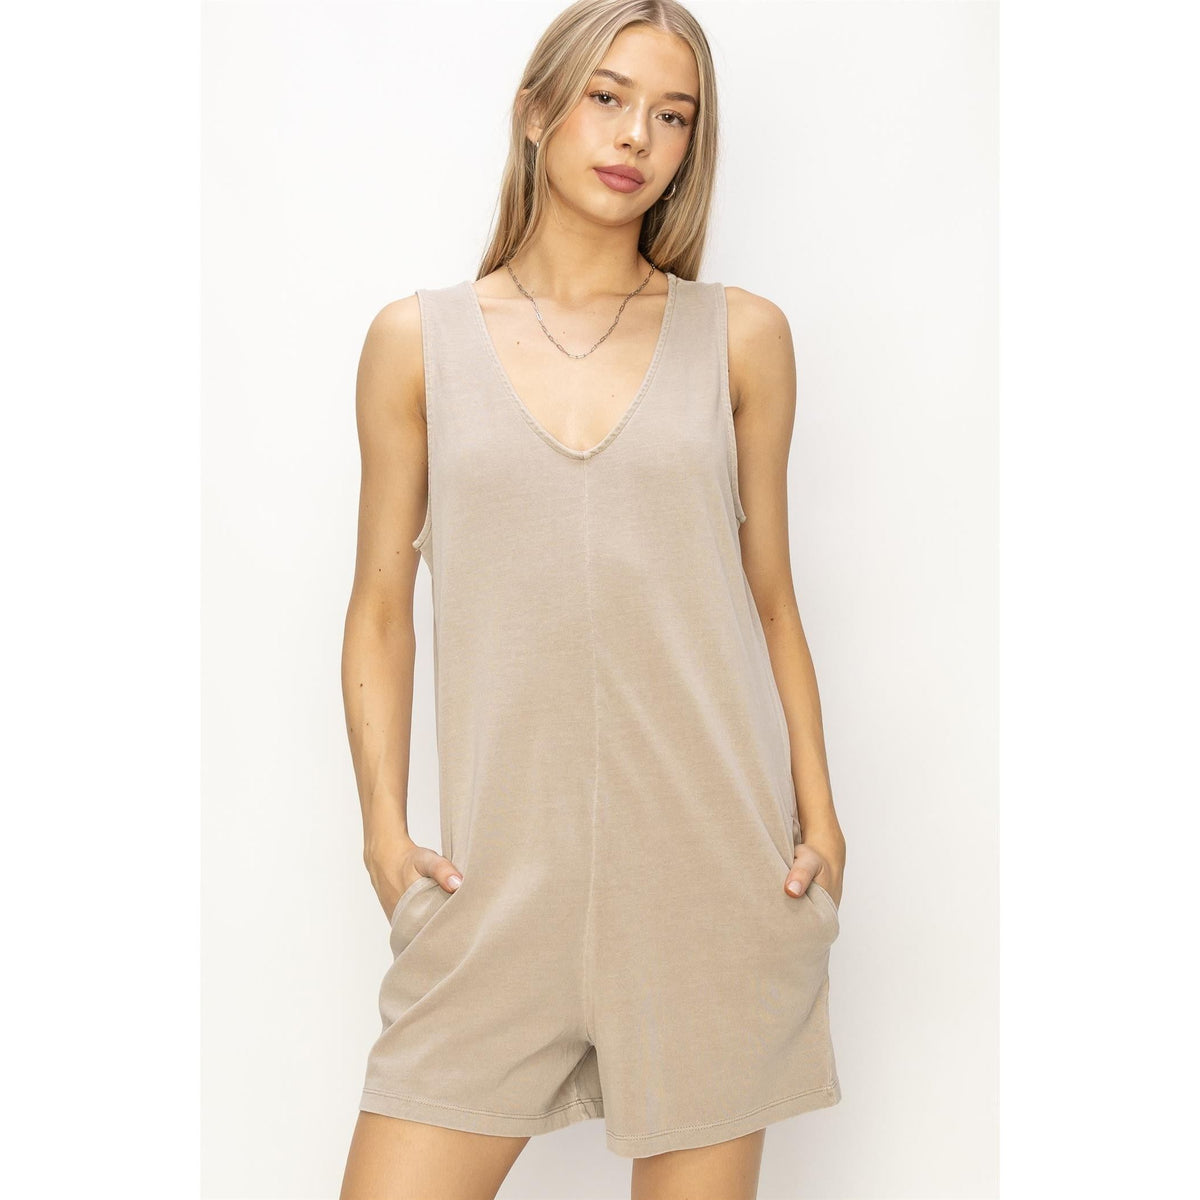 Adventurer Romper (Available in Multiple Colors)